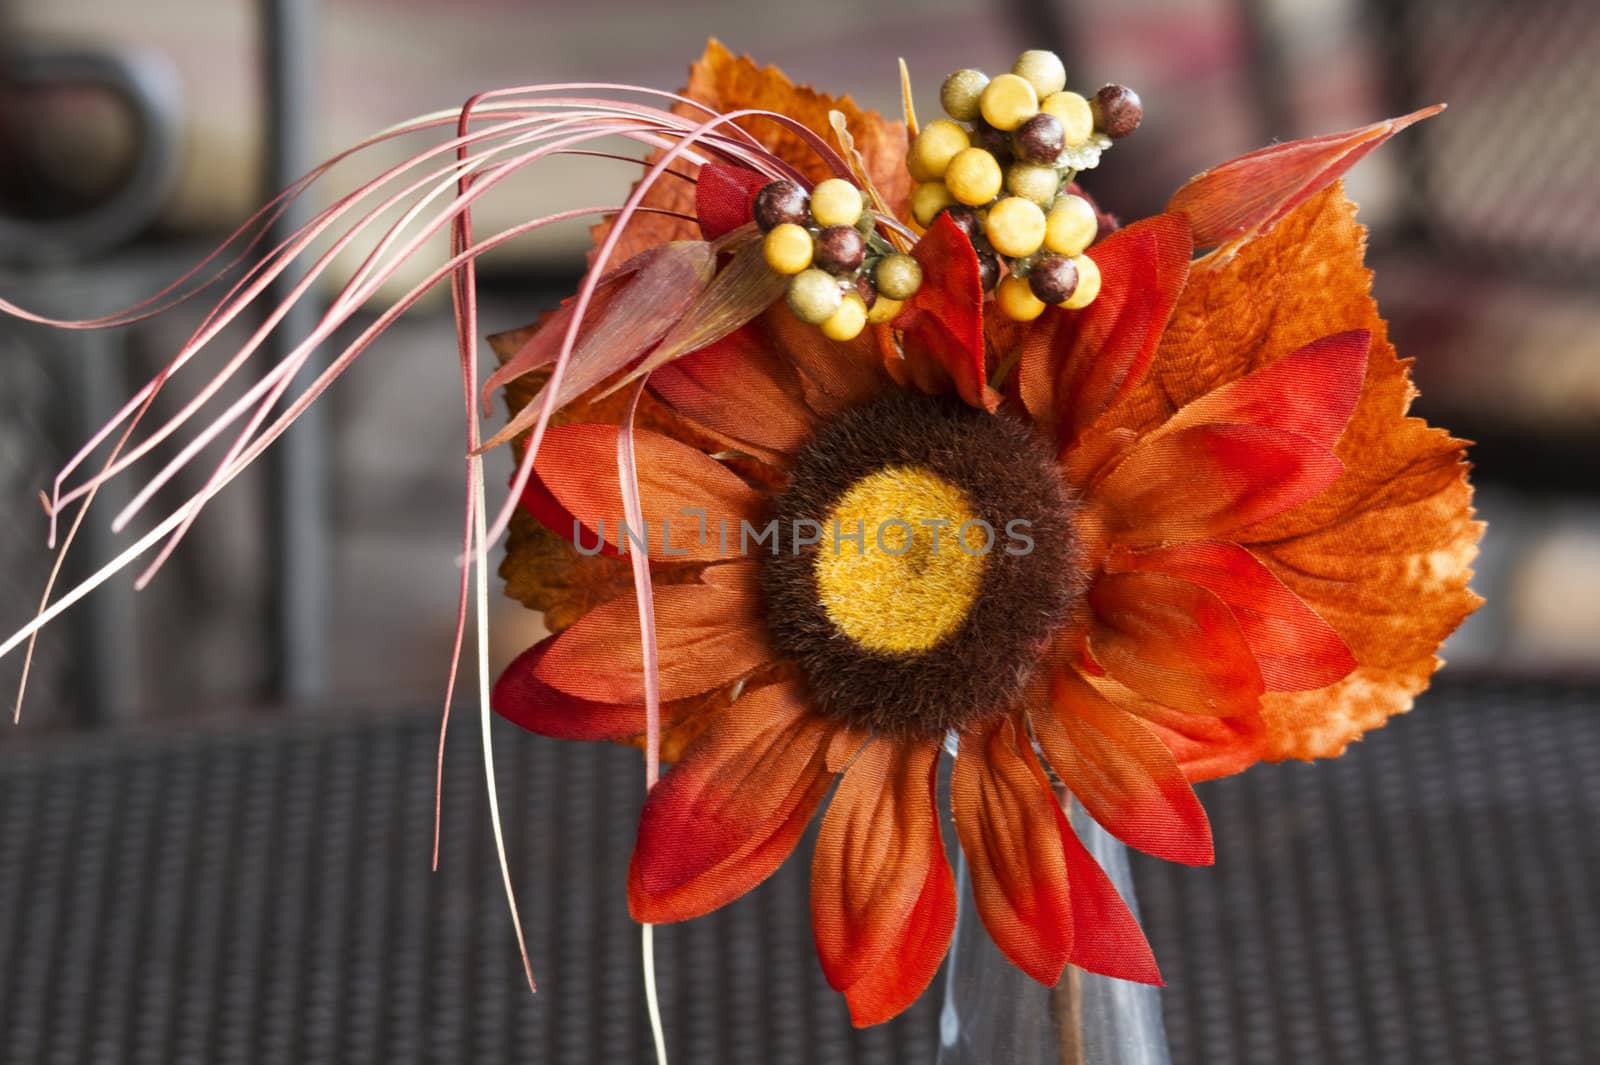 Bright orange silk flower in a small, single bloom arrangement brings a simple touch of nature's color to a patio table